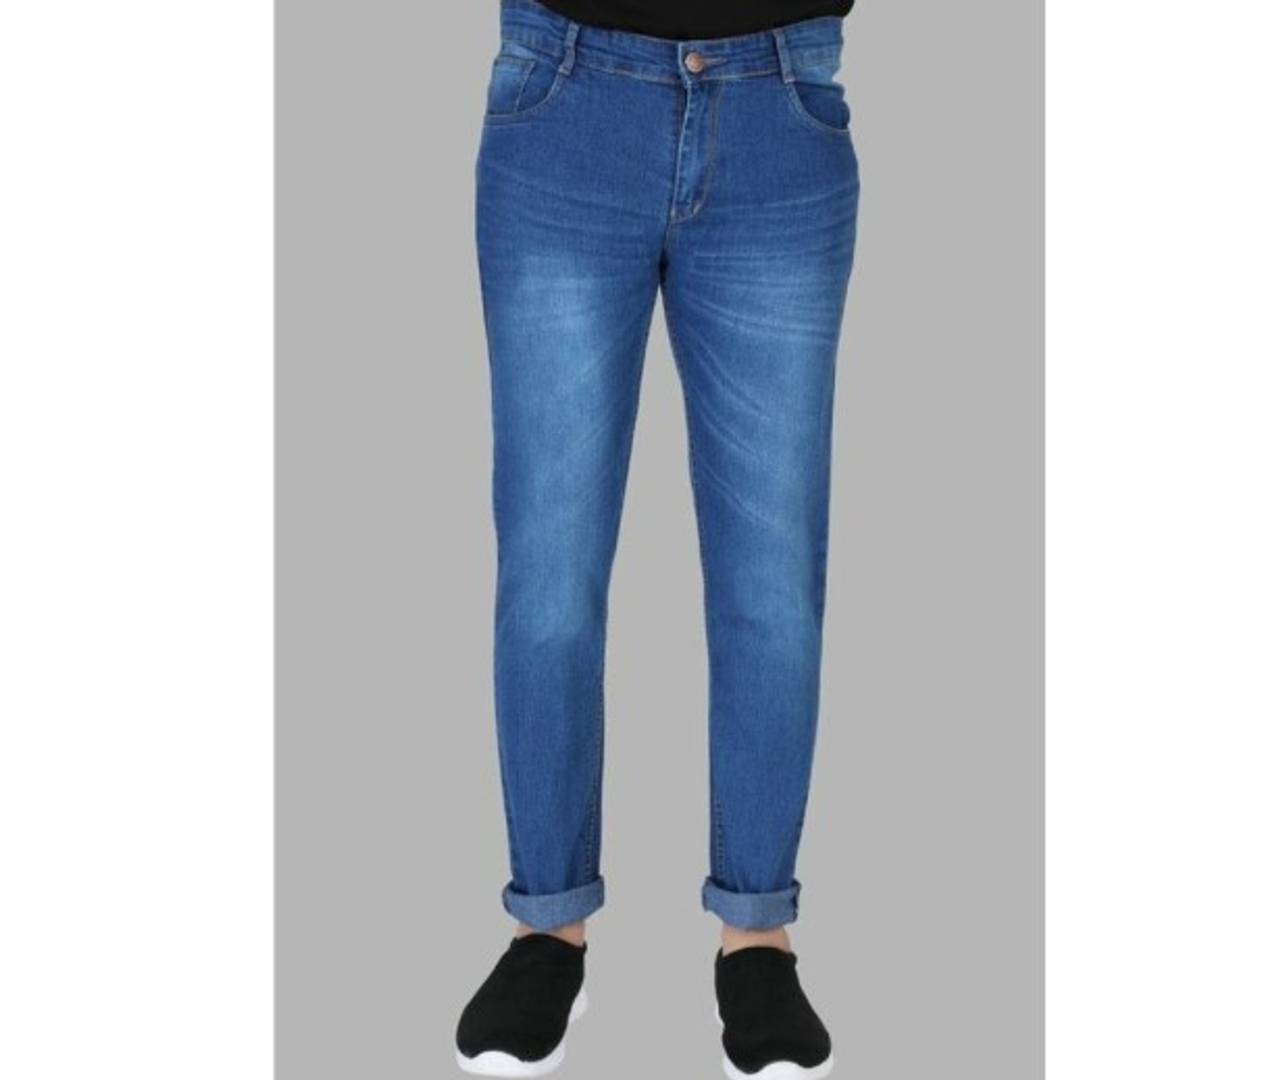 Stylish Cotton Solid Jeans For Men